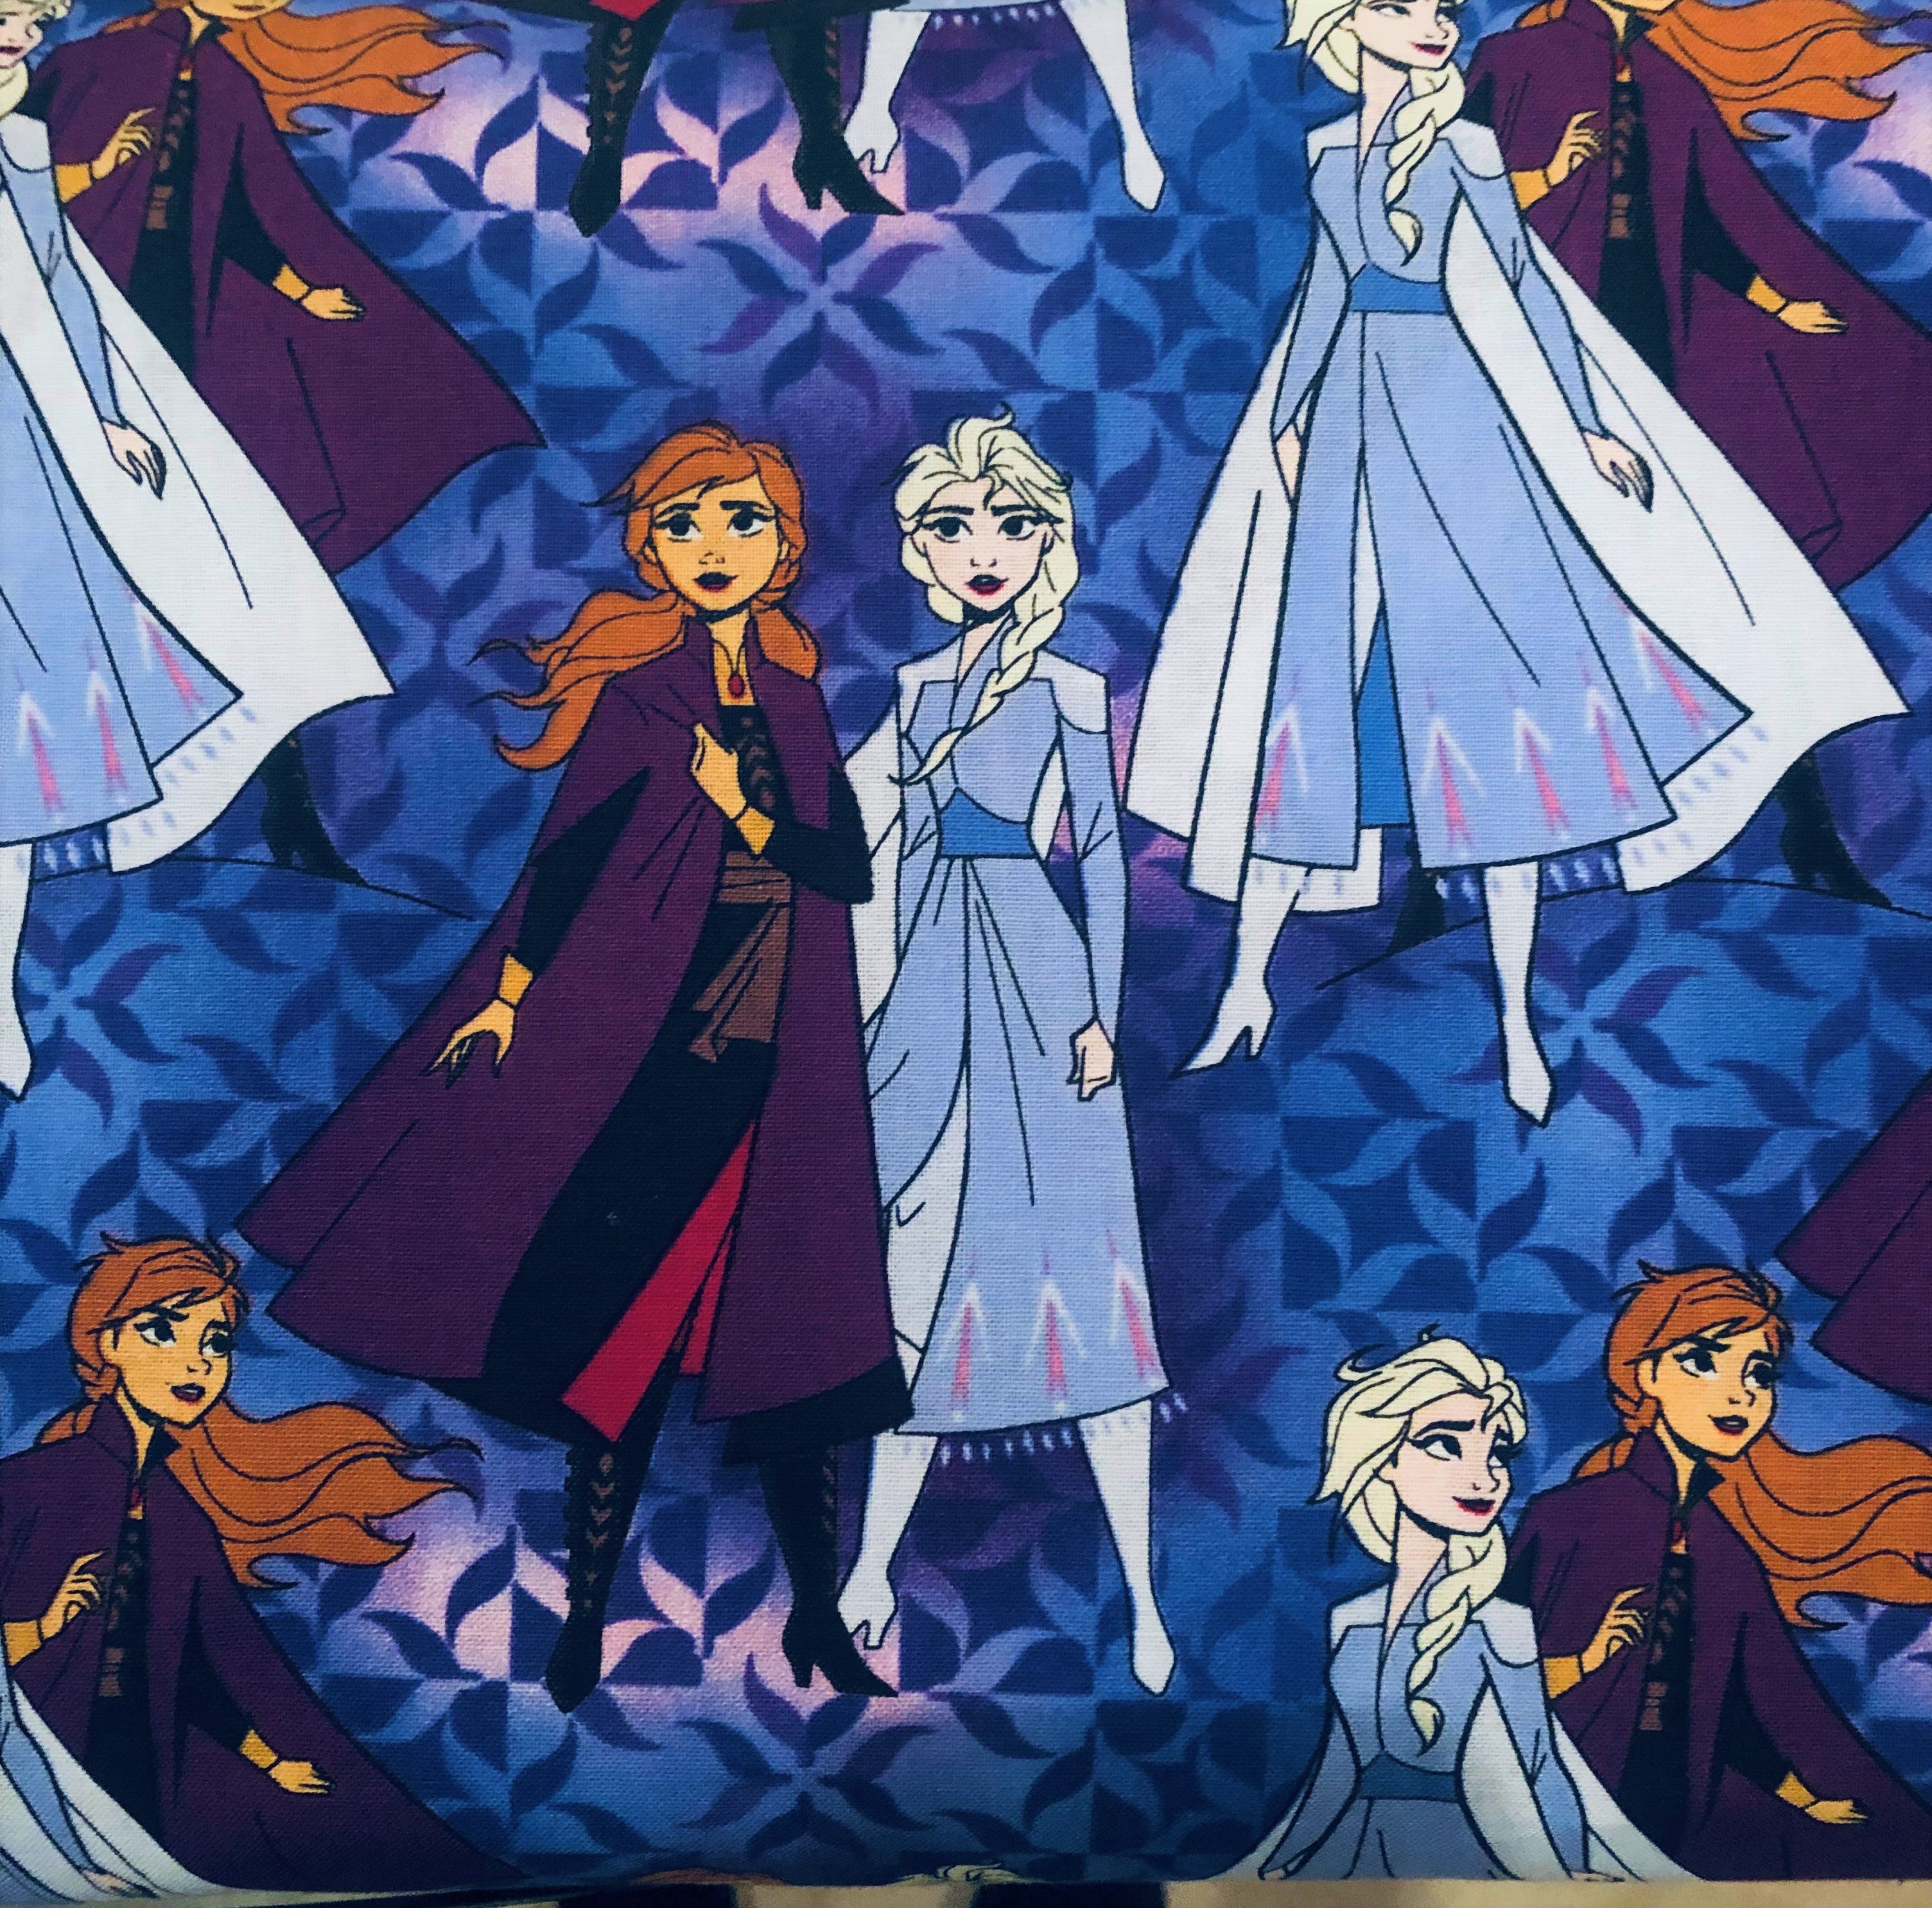 Frozen Elsa and Anna Together